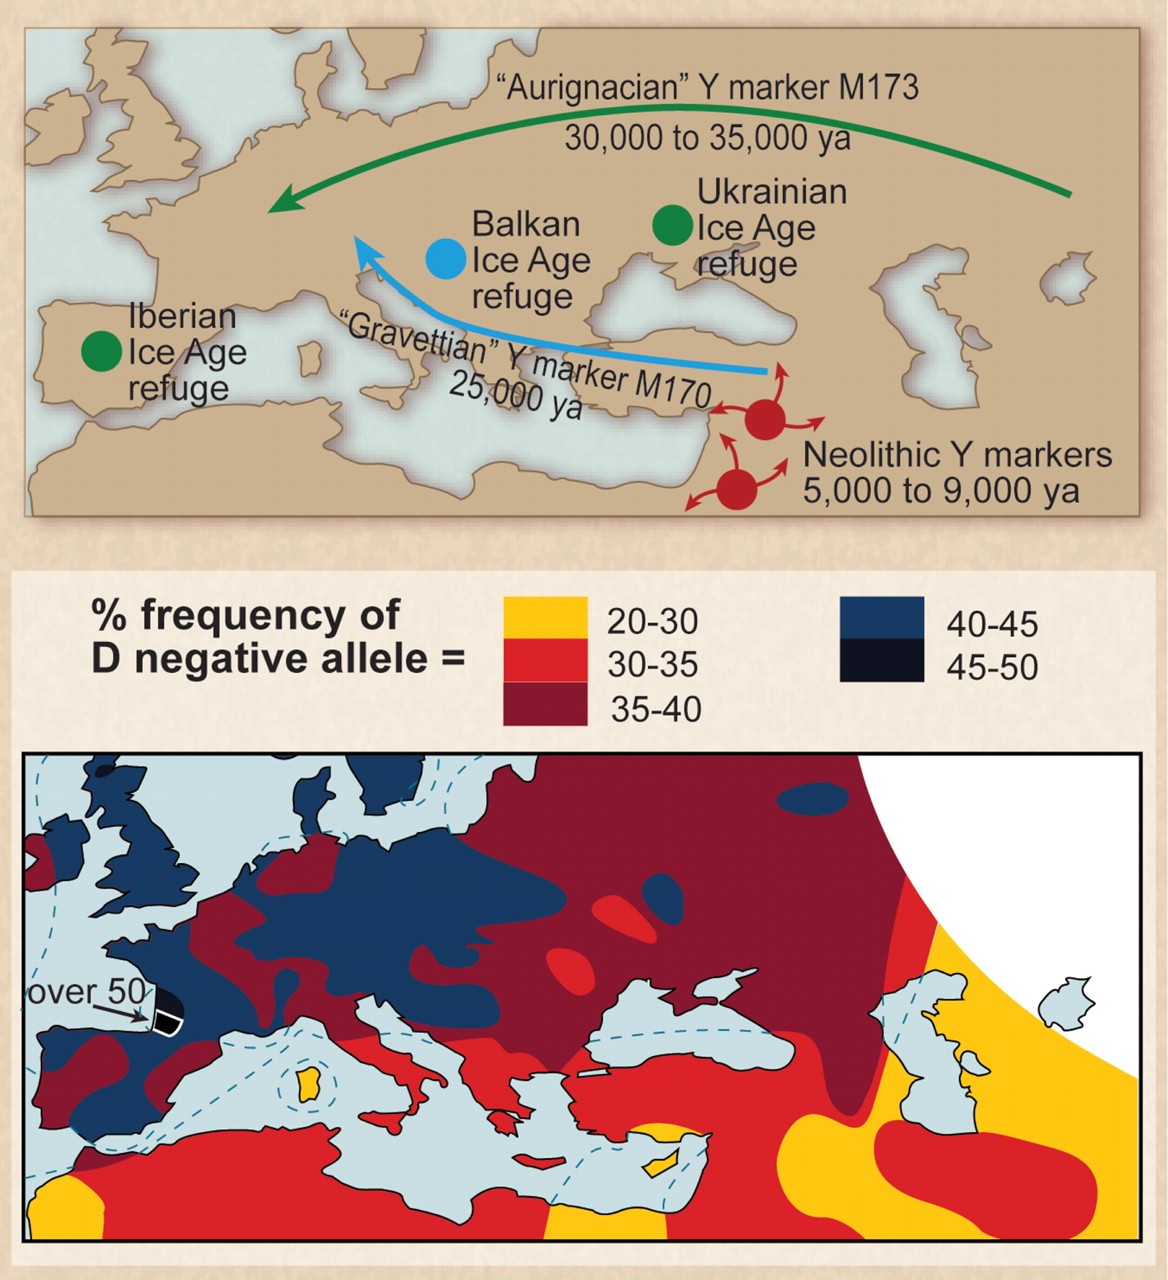 Paleolithic settlers from the last glacial maximum may be the source of the high frequency of D− allele in Europeans